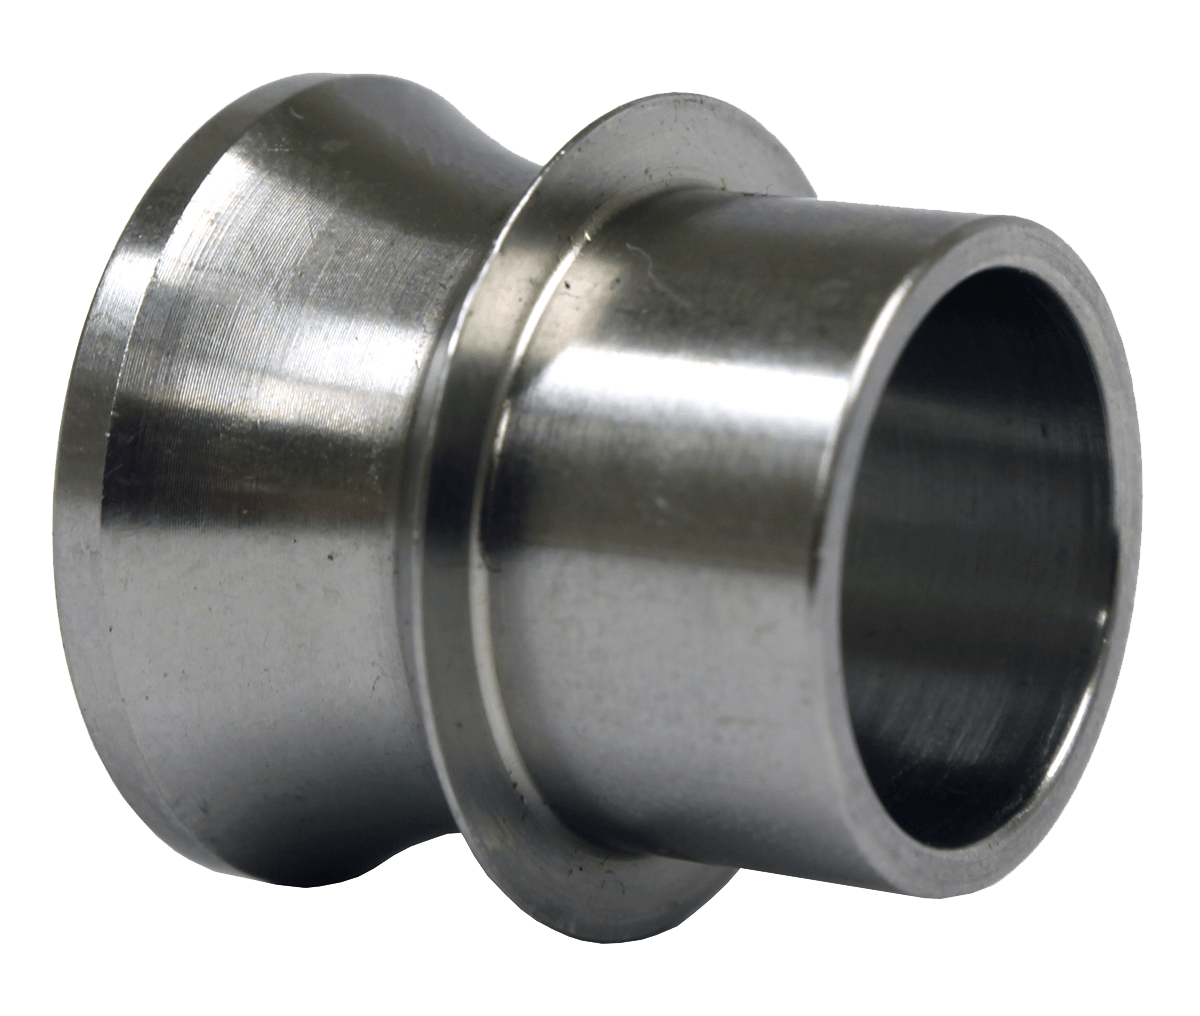 QA1 SN12-108 High Misalignment Spacer, .75 inch Od Ss, .625 inch X 1.75 inch Total Width